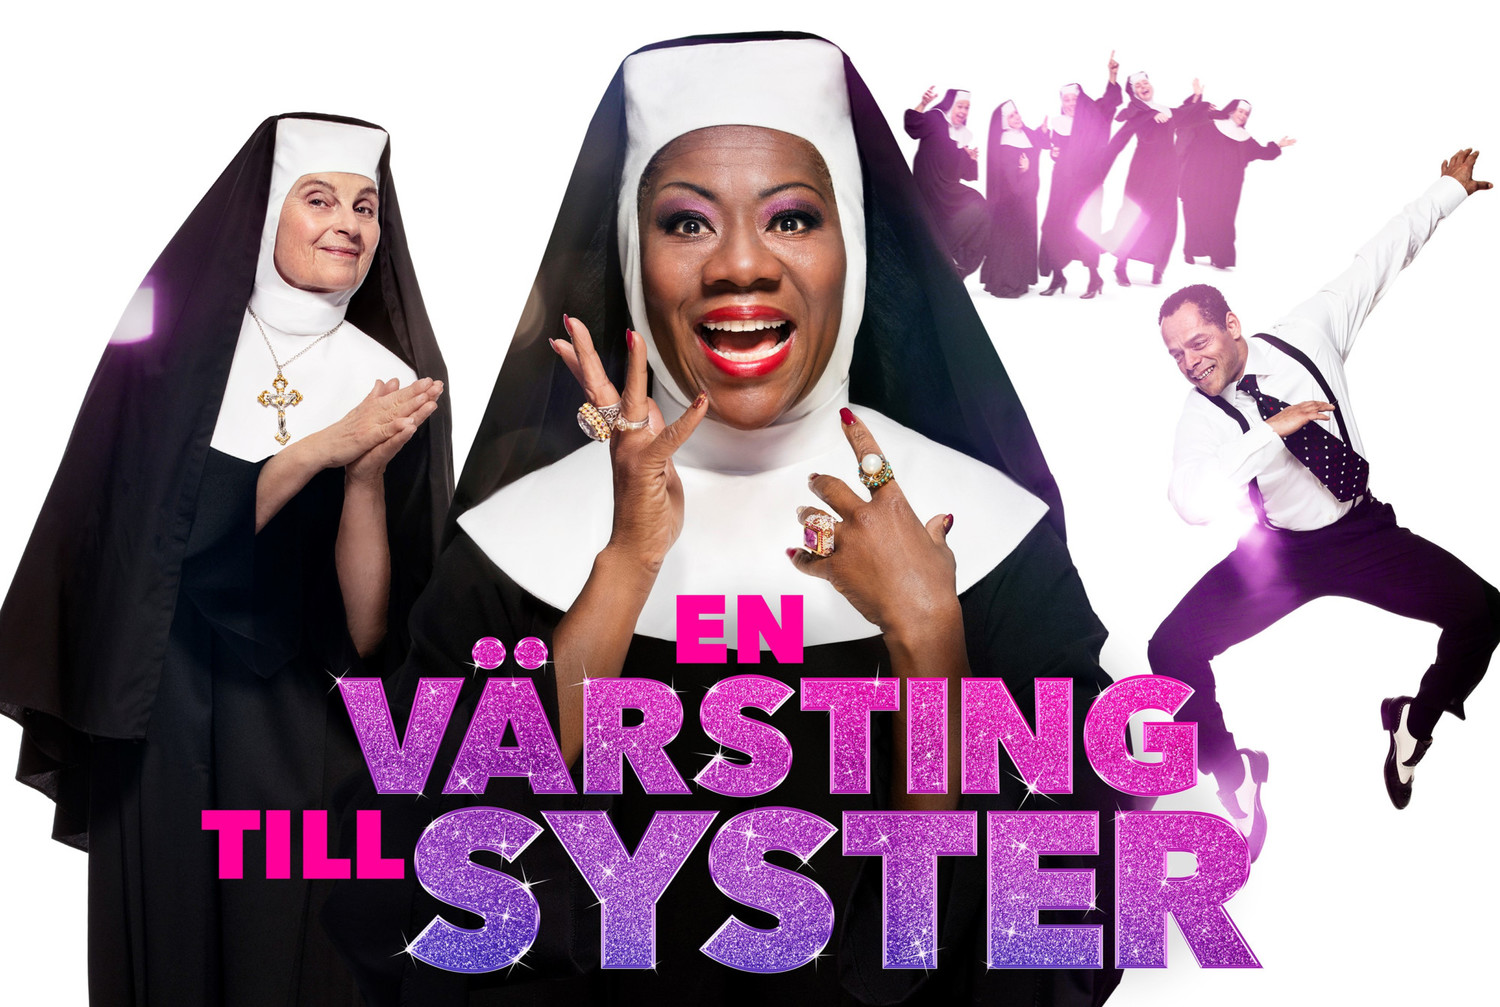 SISTER ACT (EN VÄRSTING TILL SYSTER) Comes To The China Theater 